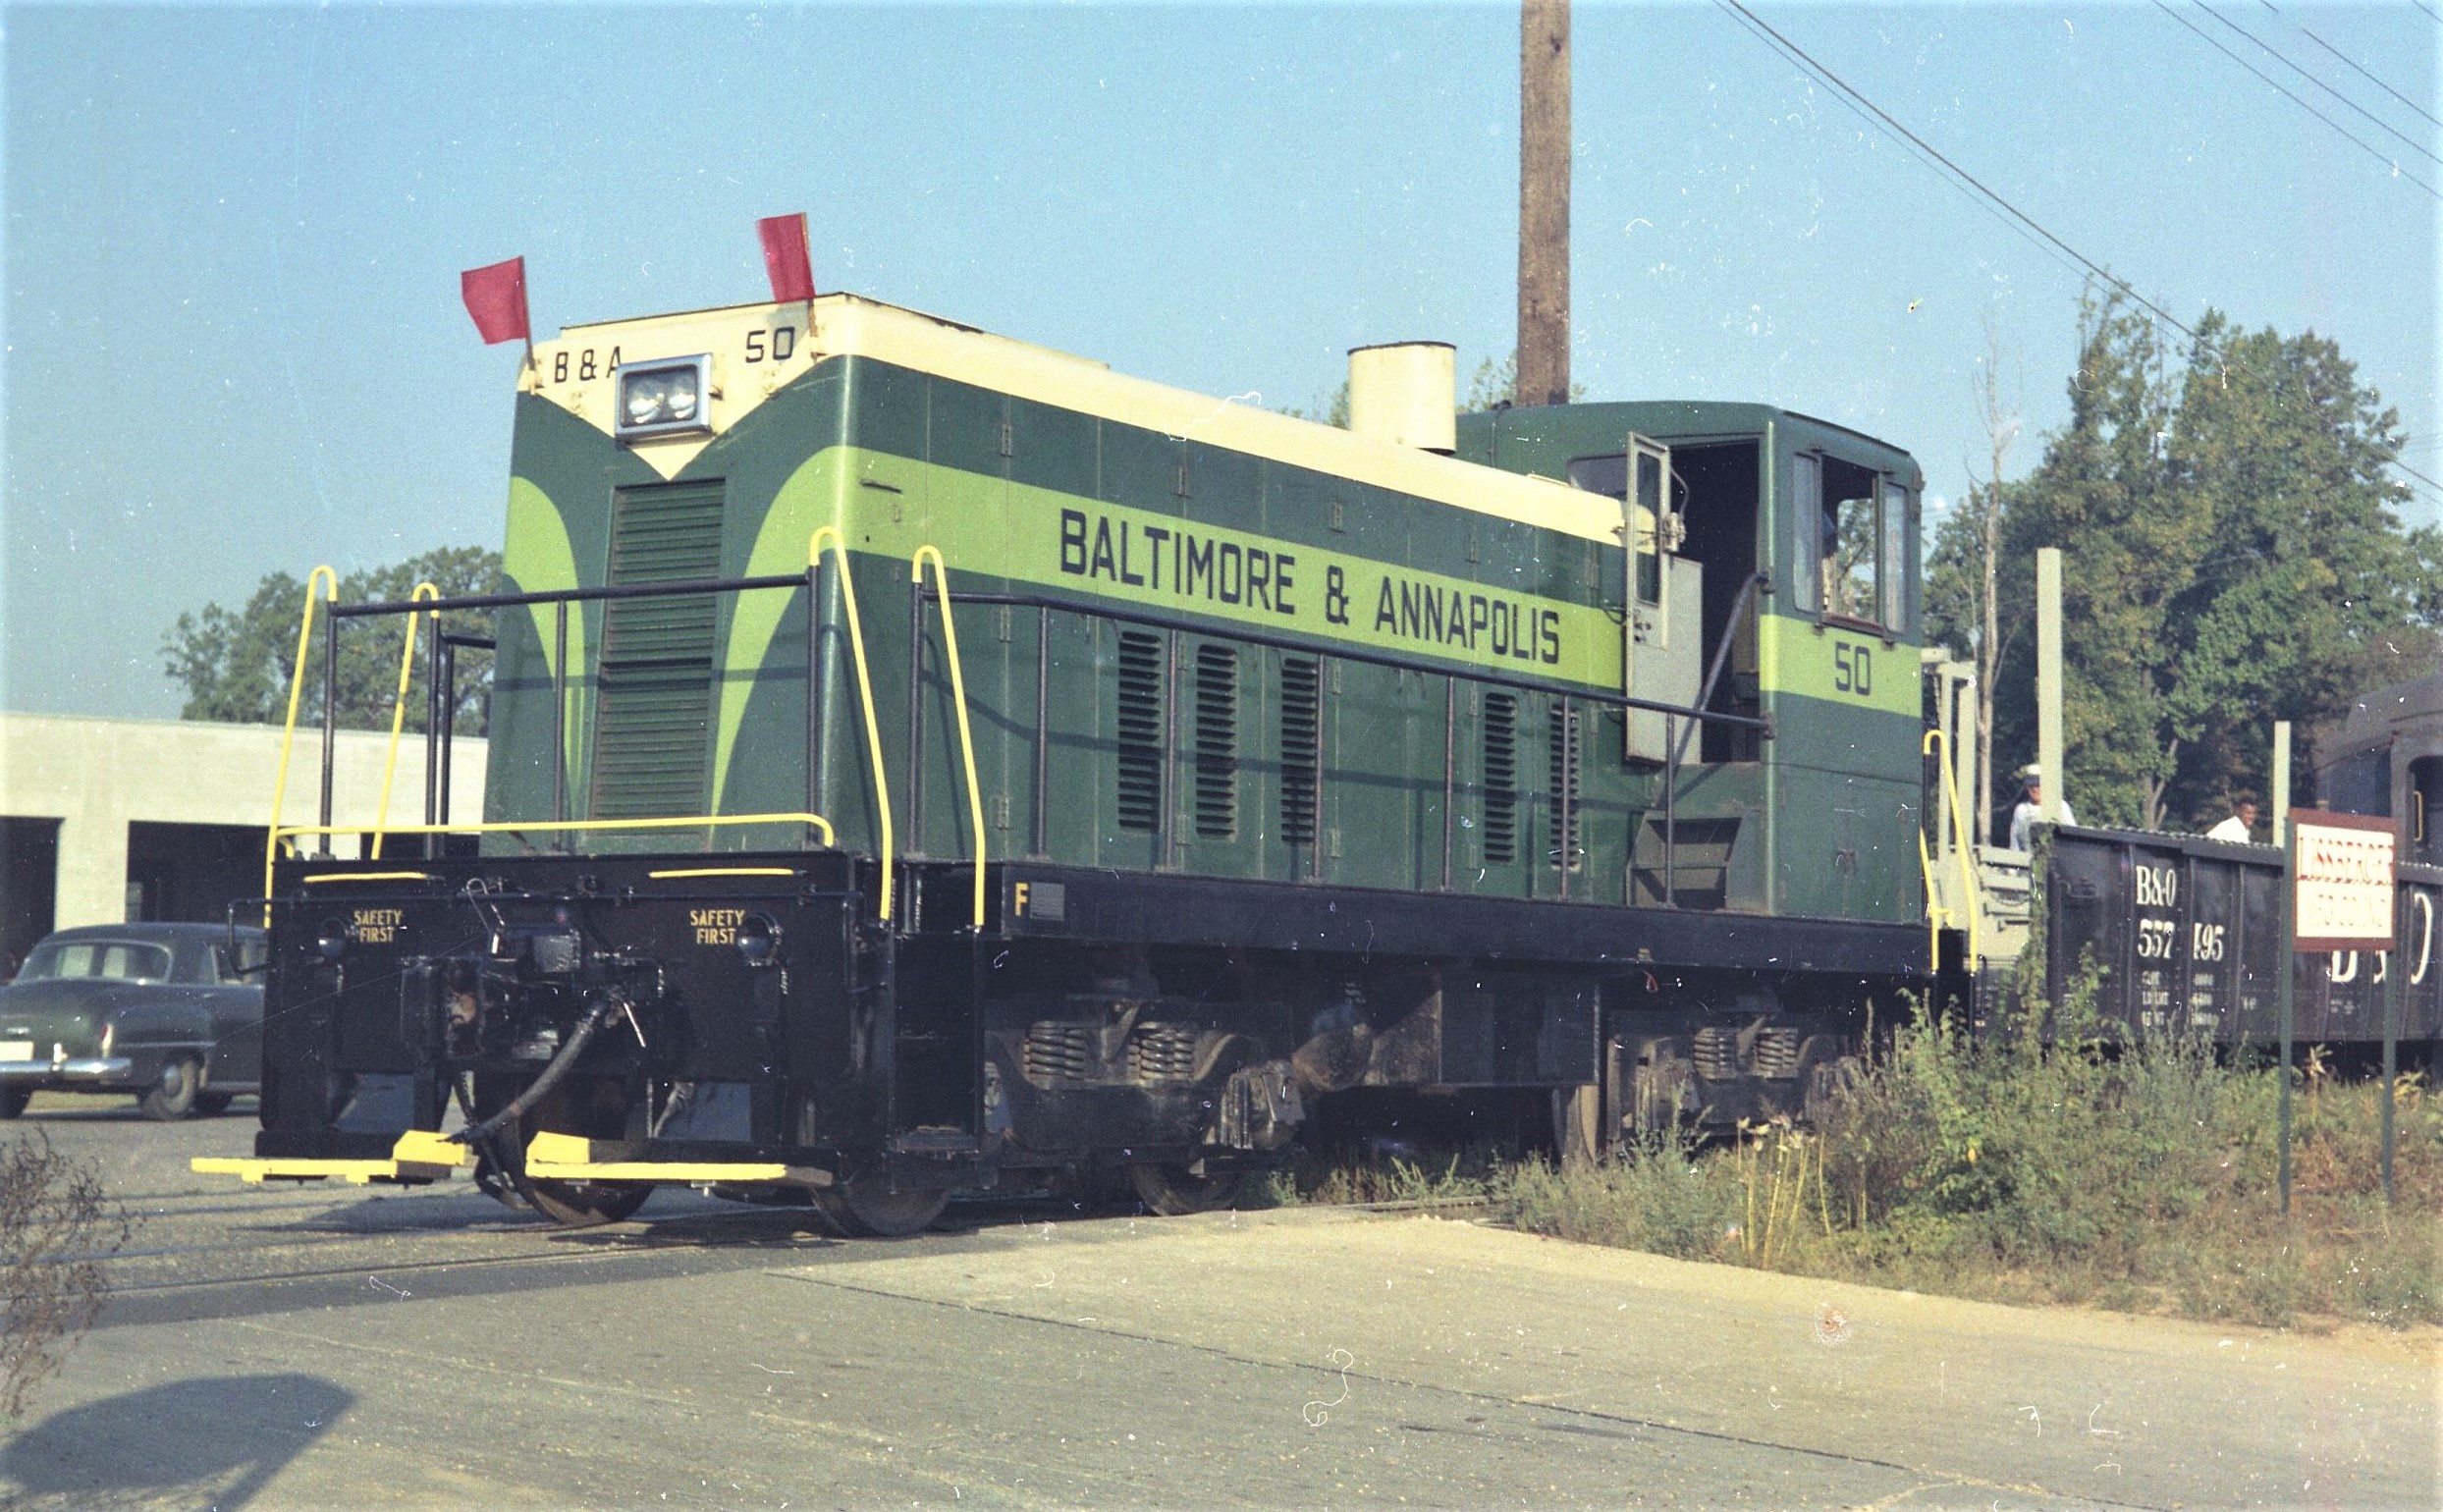 Baltimore and Annapolis | Harundale, Maryland | GE 70-Ton #50 diesel-electric locomotive | Baltimore Chapter, NRHS, excursion train | September 24, 1961 | John Hilton photograph